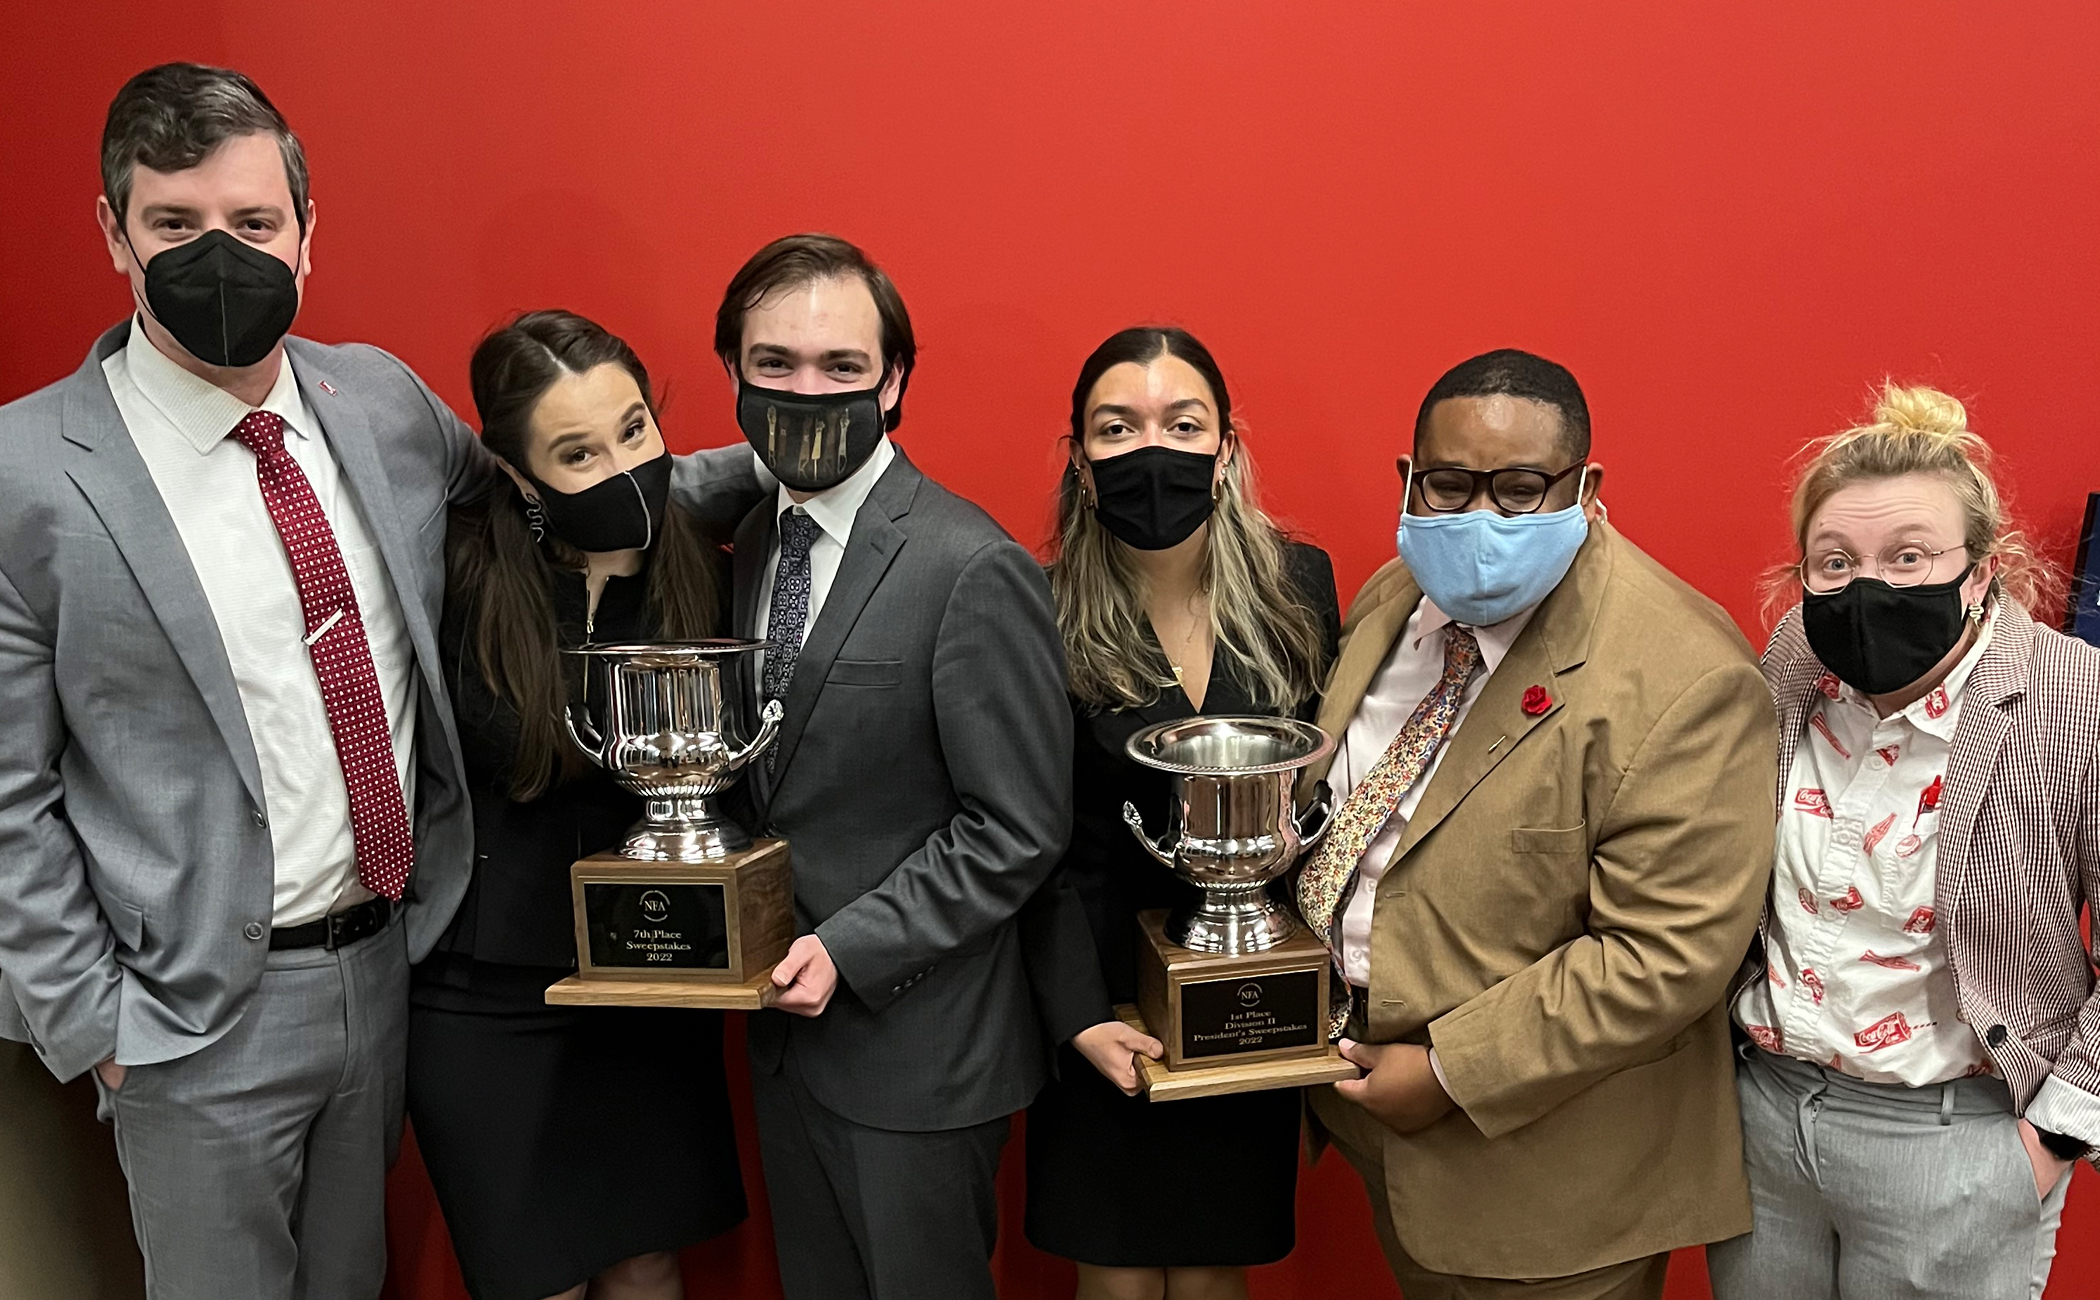 Members of the Alabama Forensic Council hold two trophies